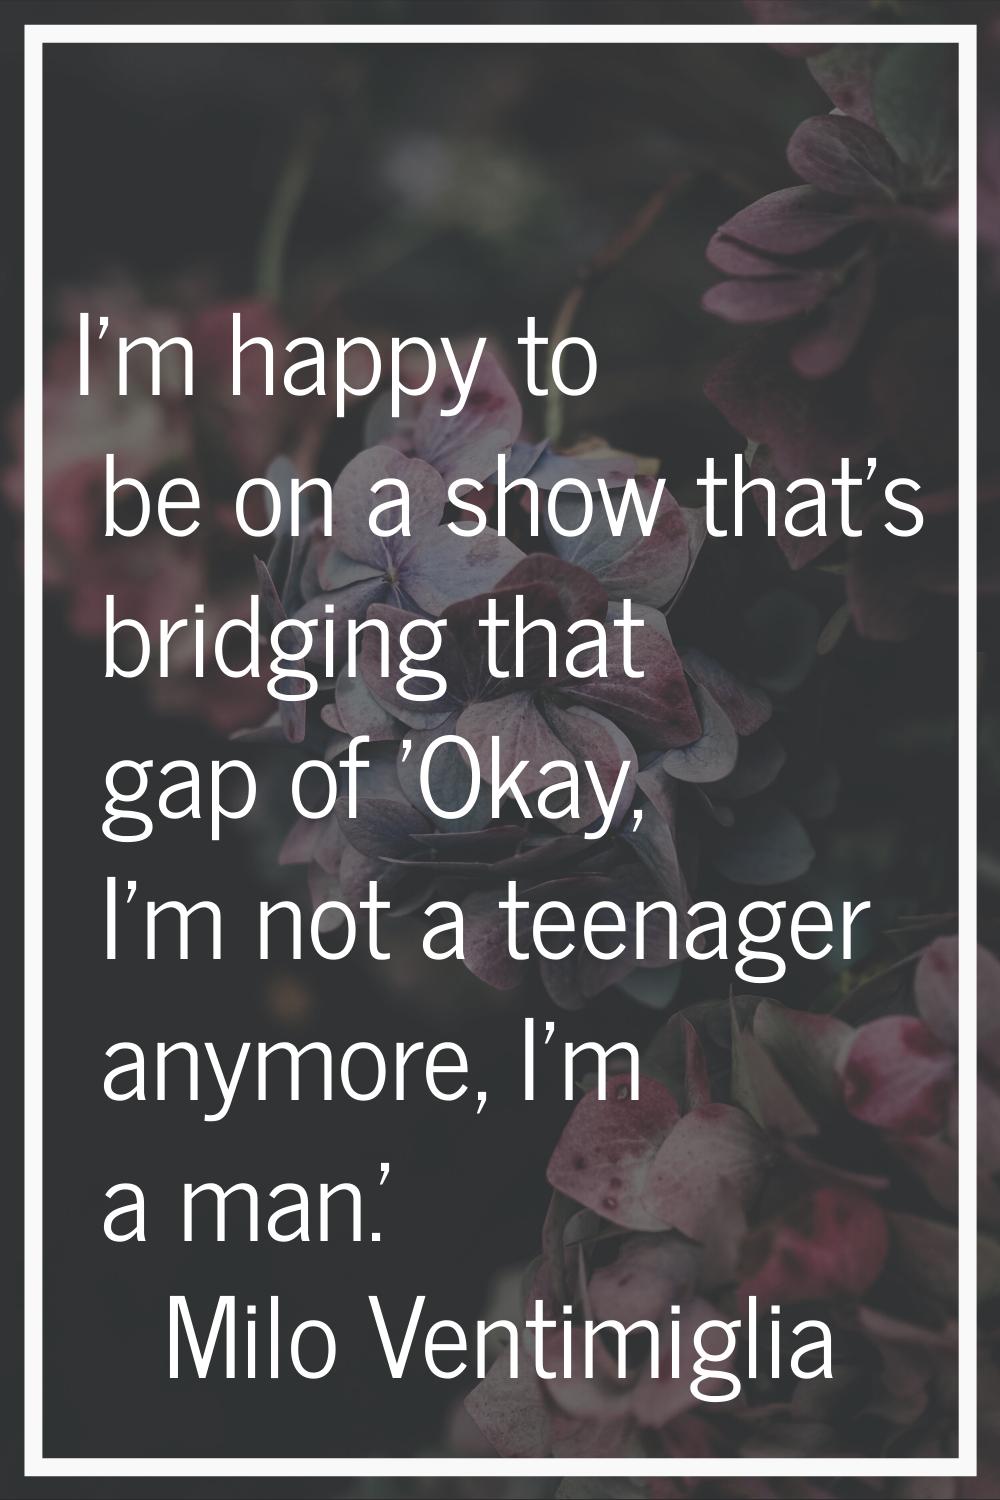 I'm happy to be on a show that's bridging that gap of 'Okay, I'm not a teenager anymore, I'm a man.